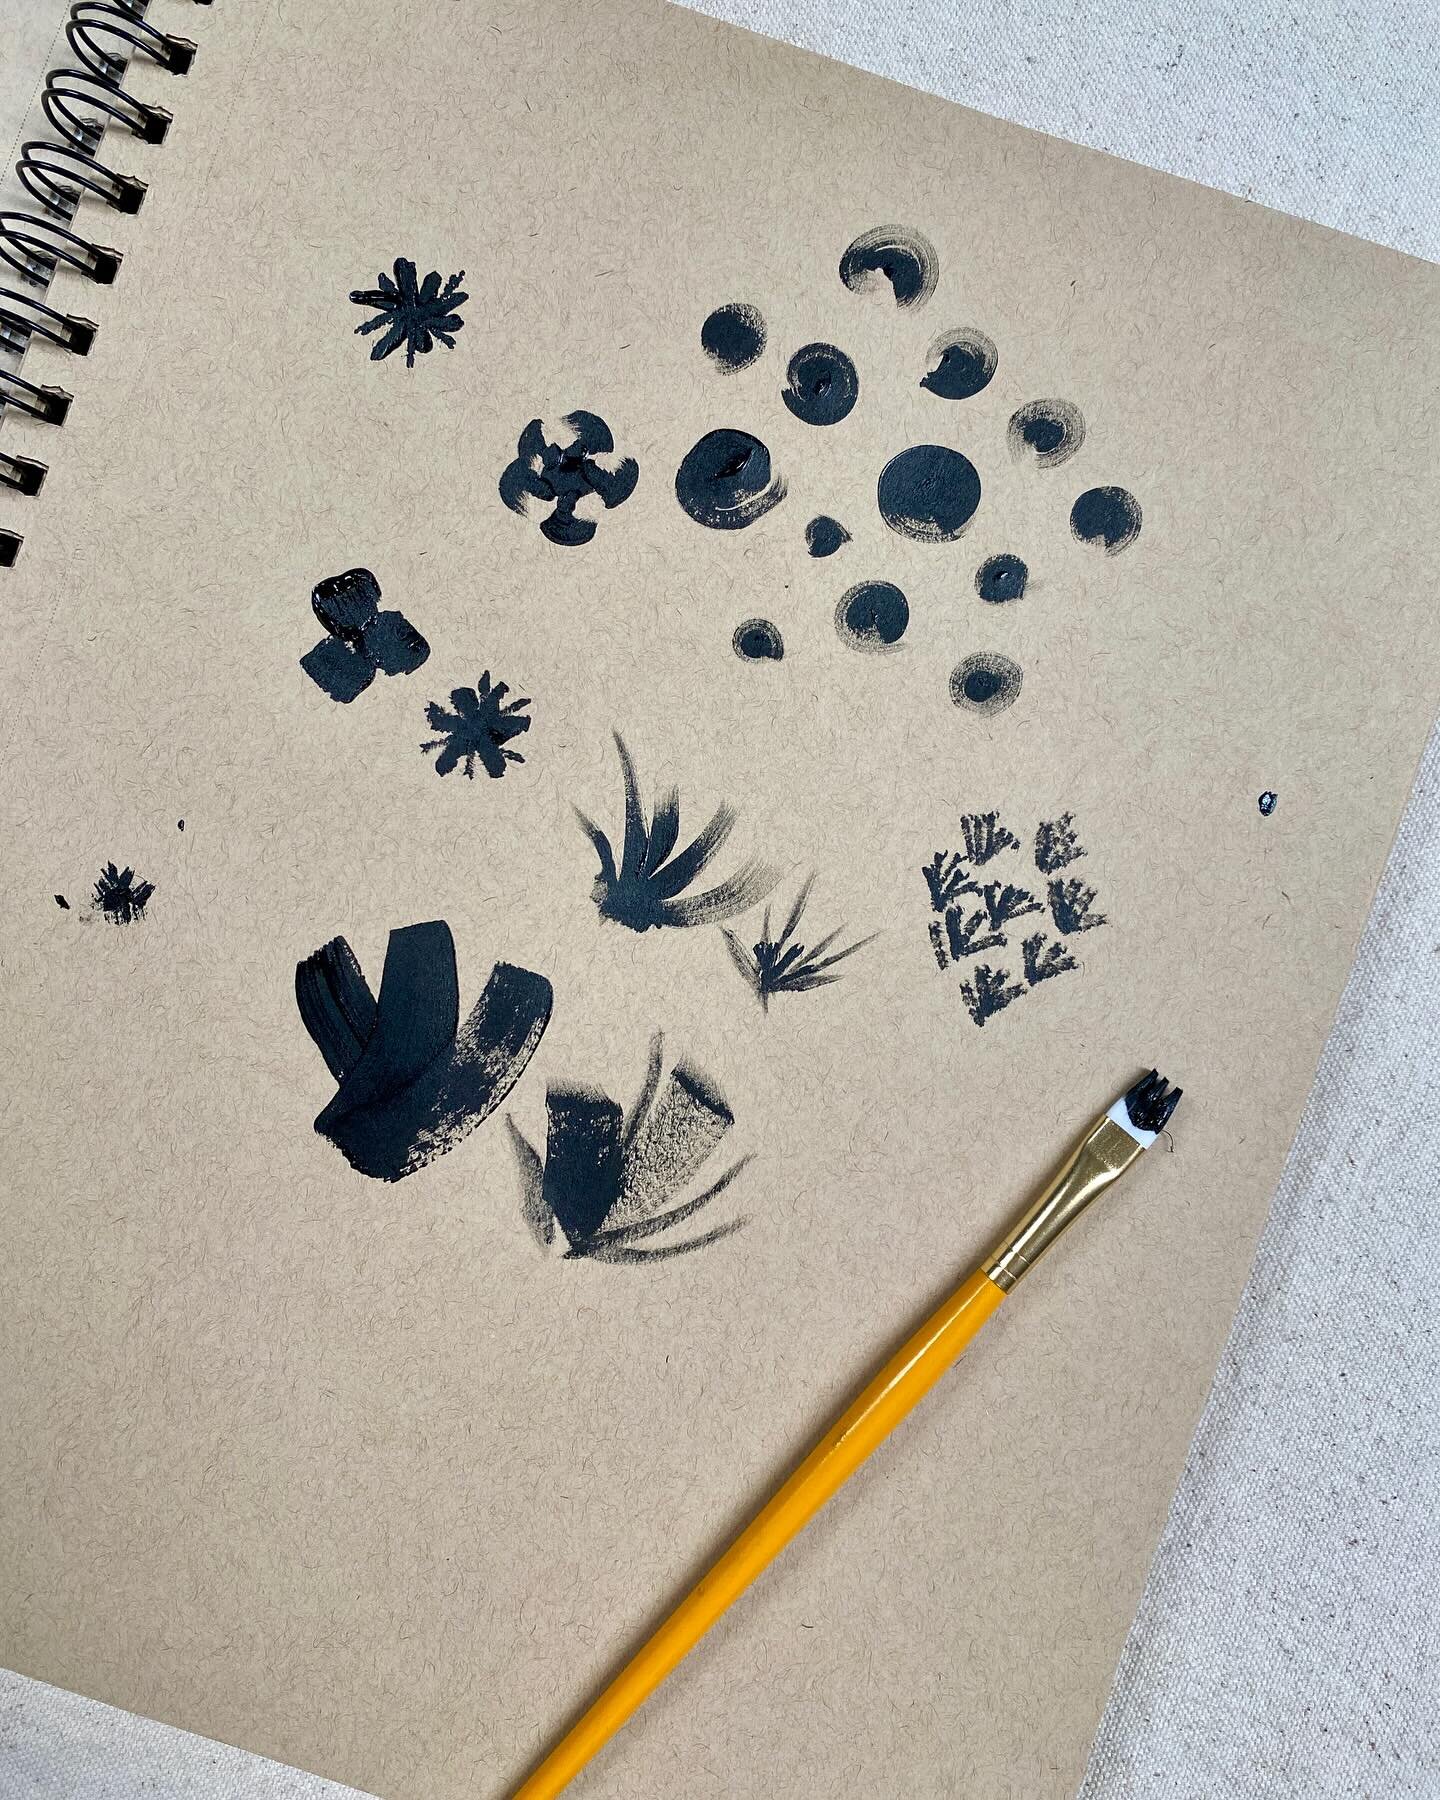 I&rsquo;m doing a five day challenge making surface design patterns. Why is it so hard to put pencil or paint to paper?! These are my no self-judgement, five minute, whatever-comes-to-mind doodles. Day 1 ✔️

#keeplearning #learnwithbonniechristine @b